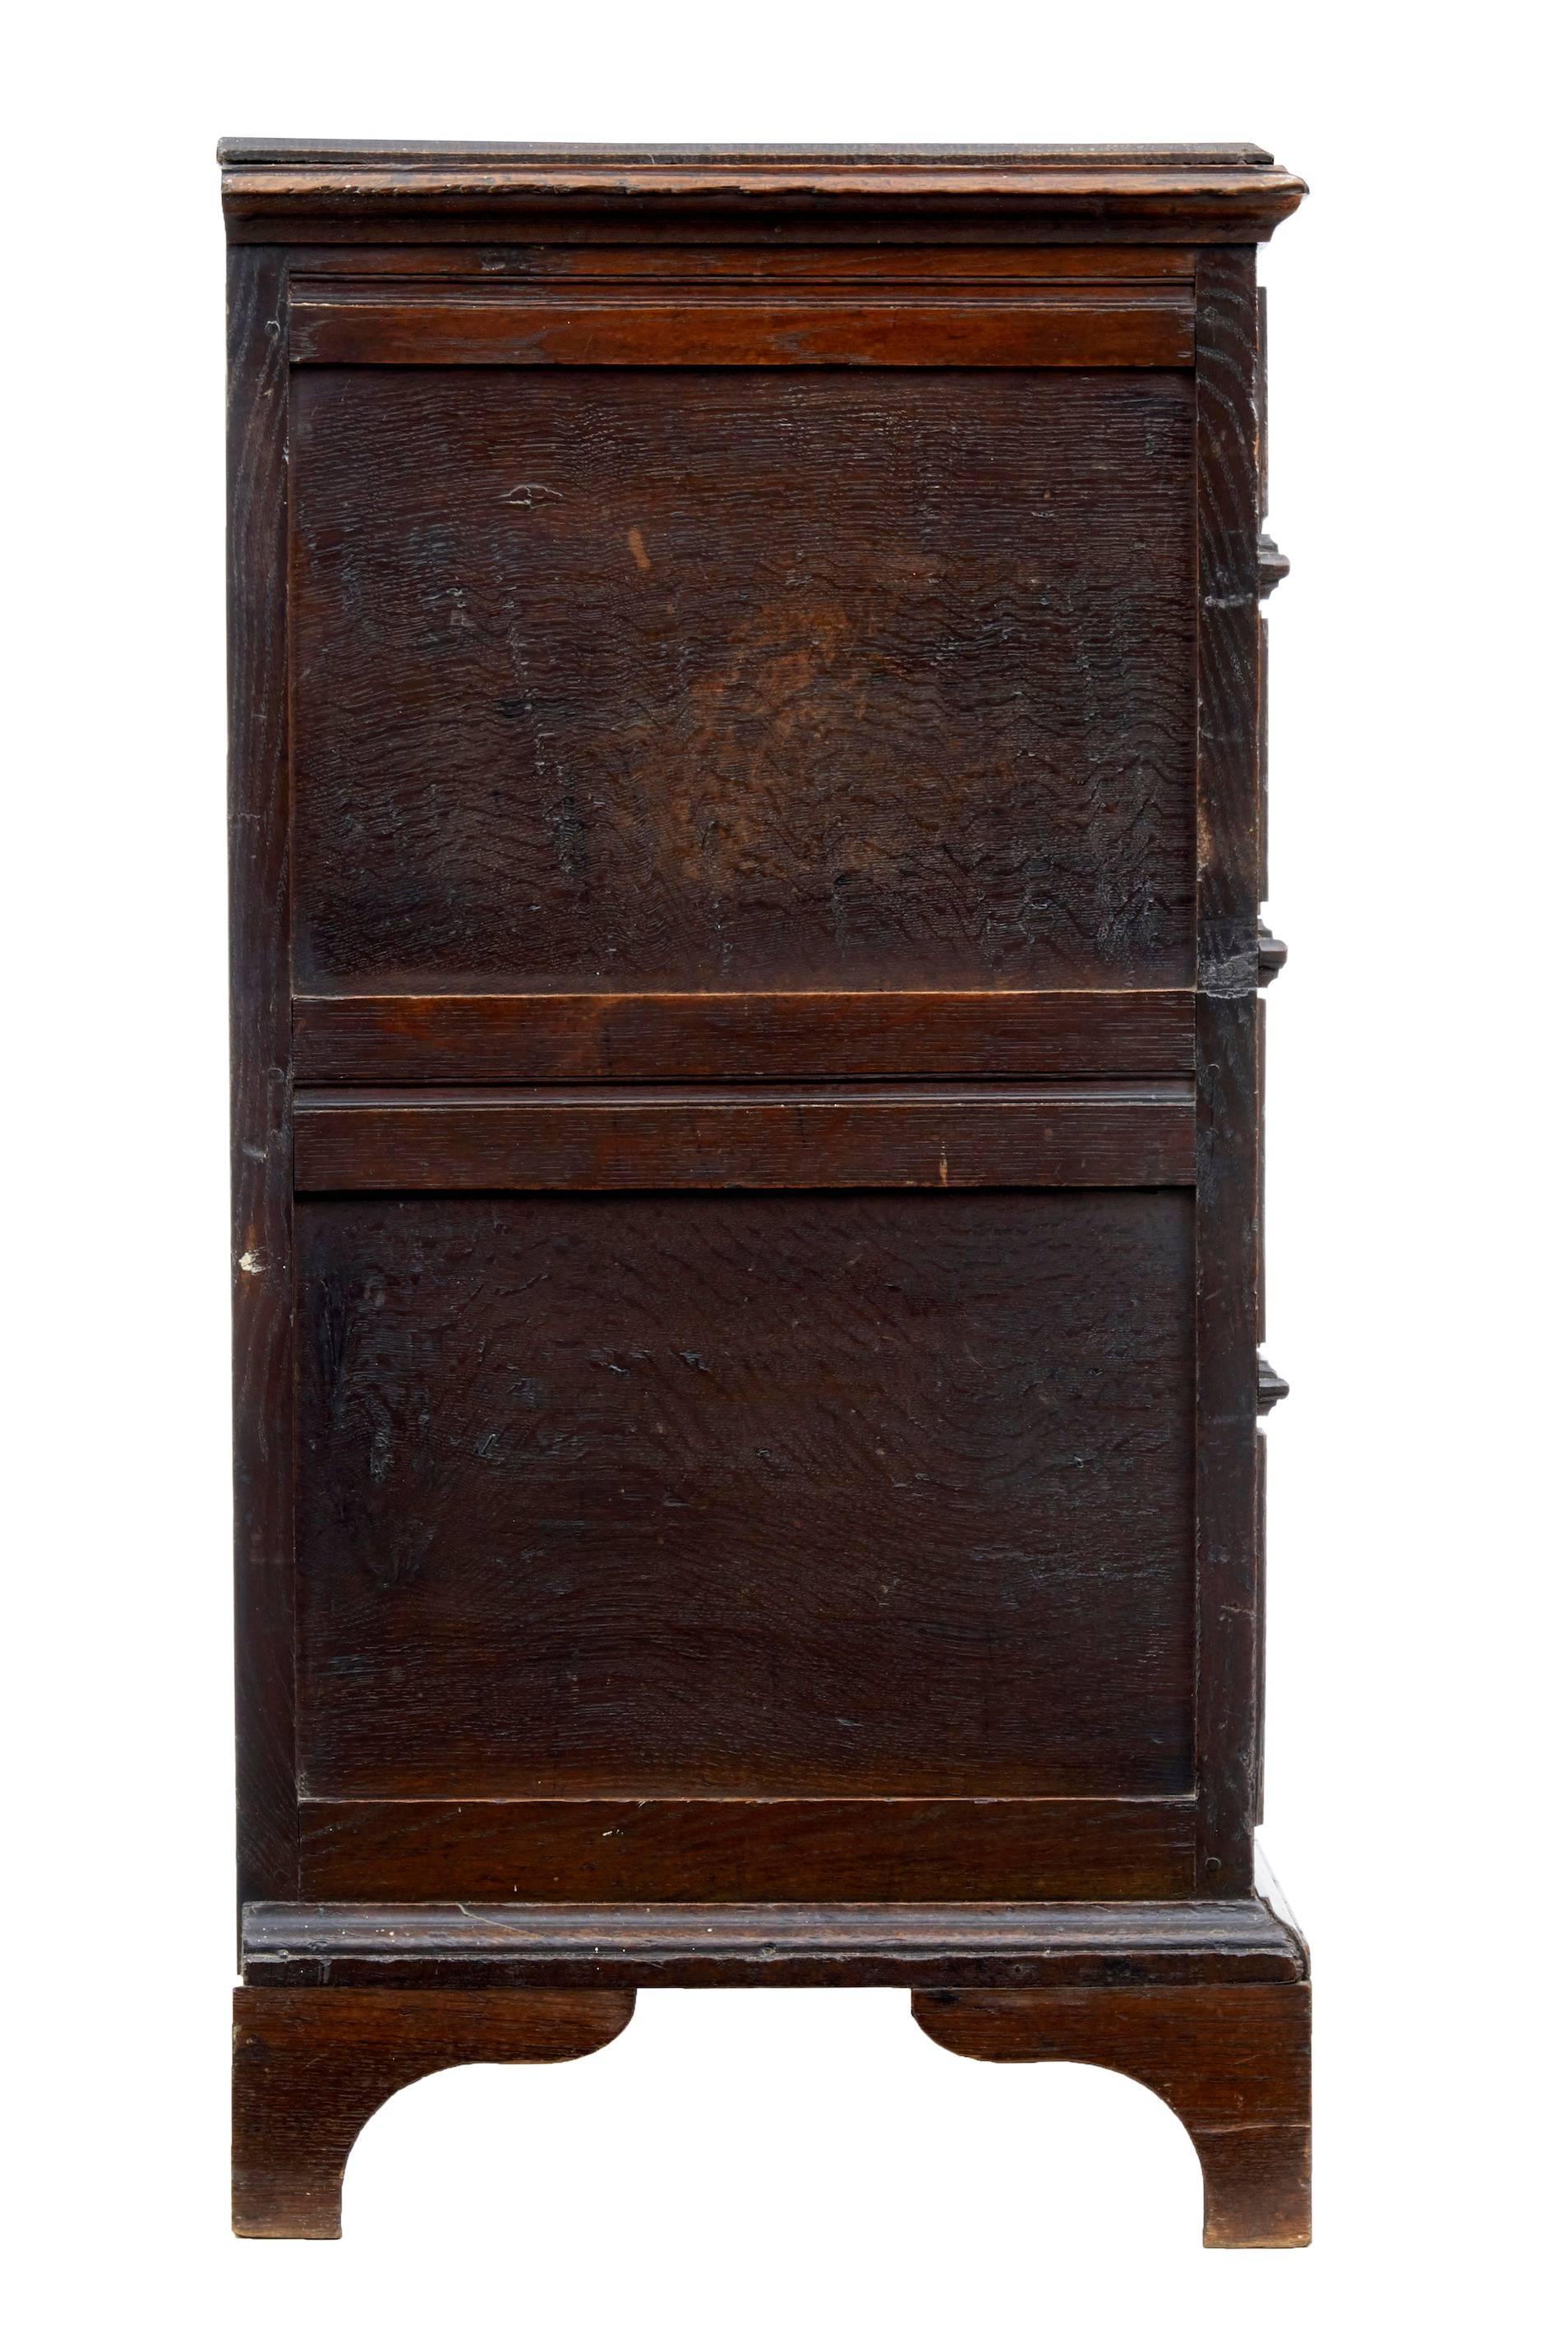 Woodwork Early 18th Century Geometric Oak Chest of Drawers